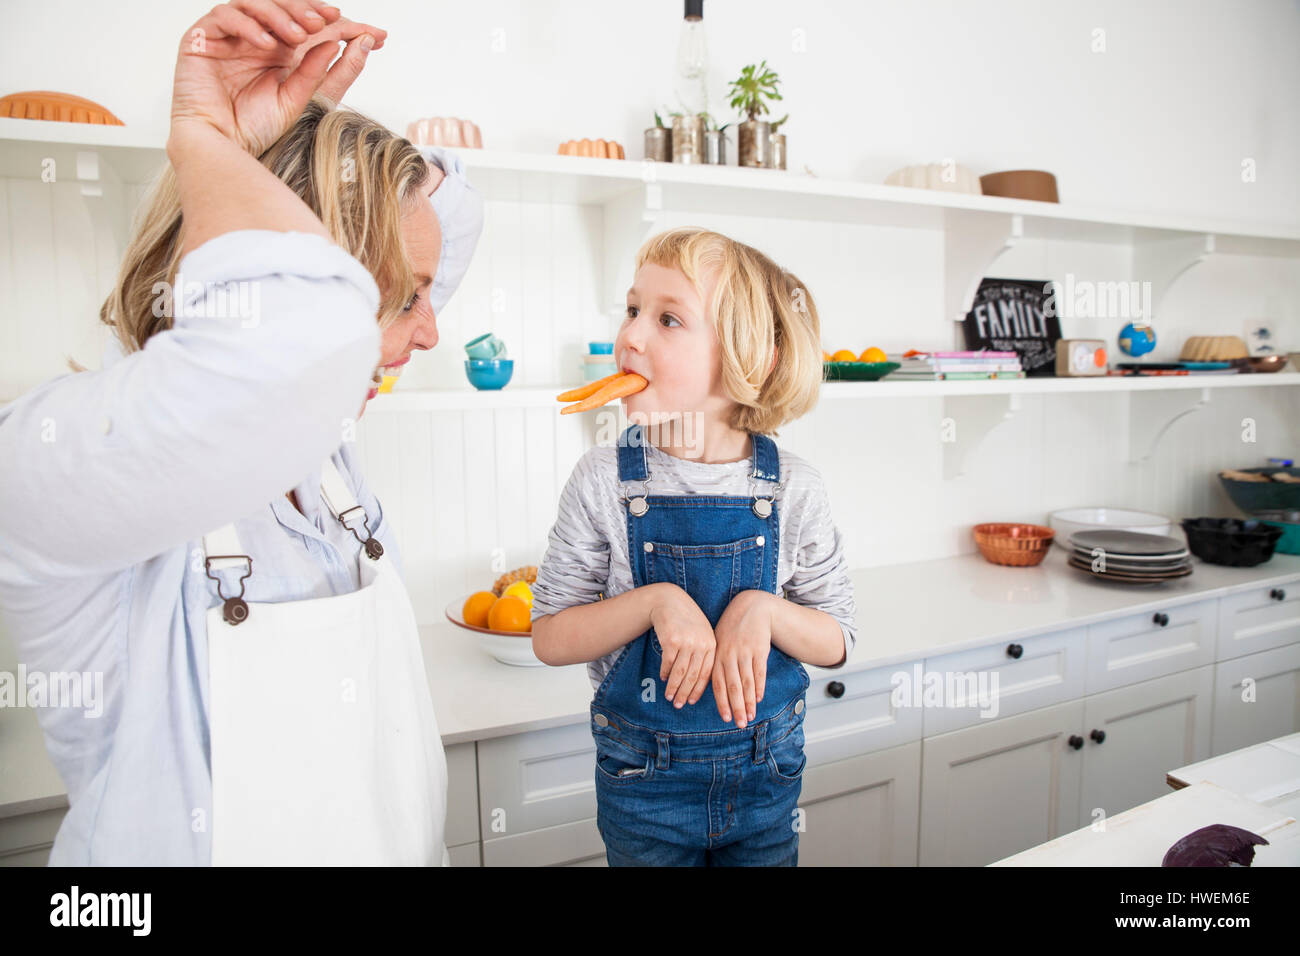 Mature woman and daughter mimicking rabbits with carrots in kitchen Stock Photo